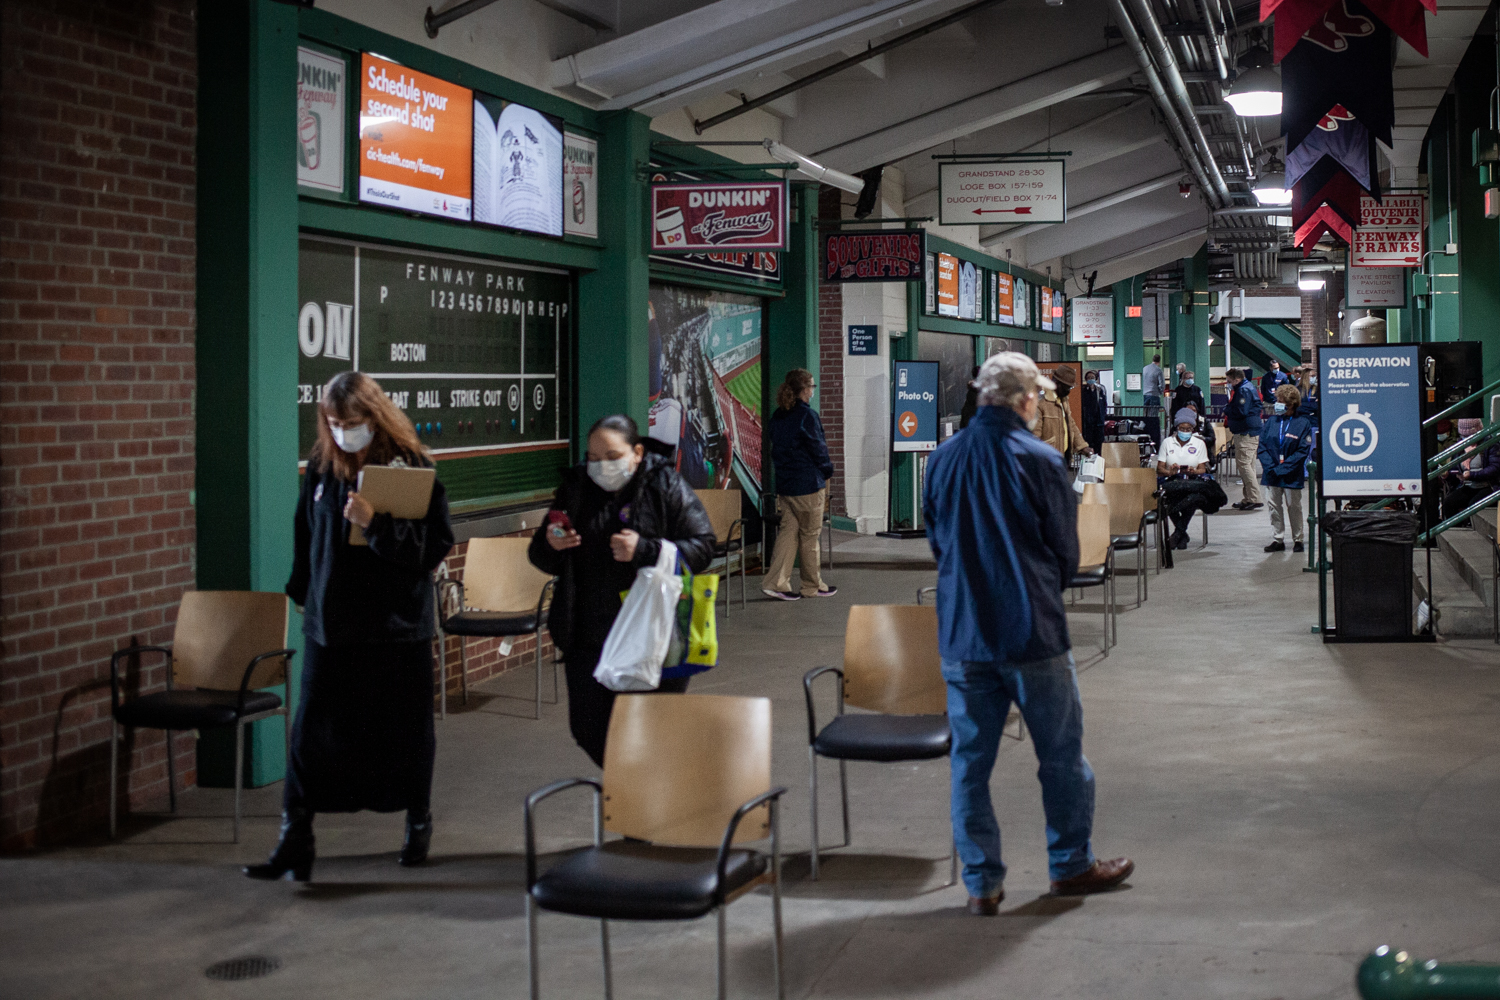 Fenway Park reopens Thursday as a COVID vaccination site welcoming walk-ins  as well as individuals with appointments 